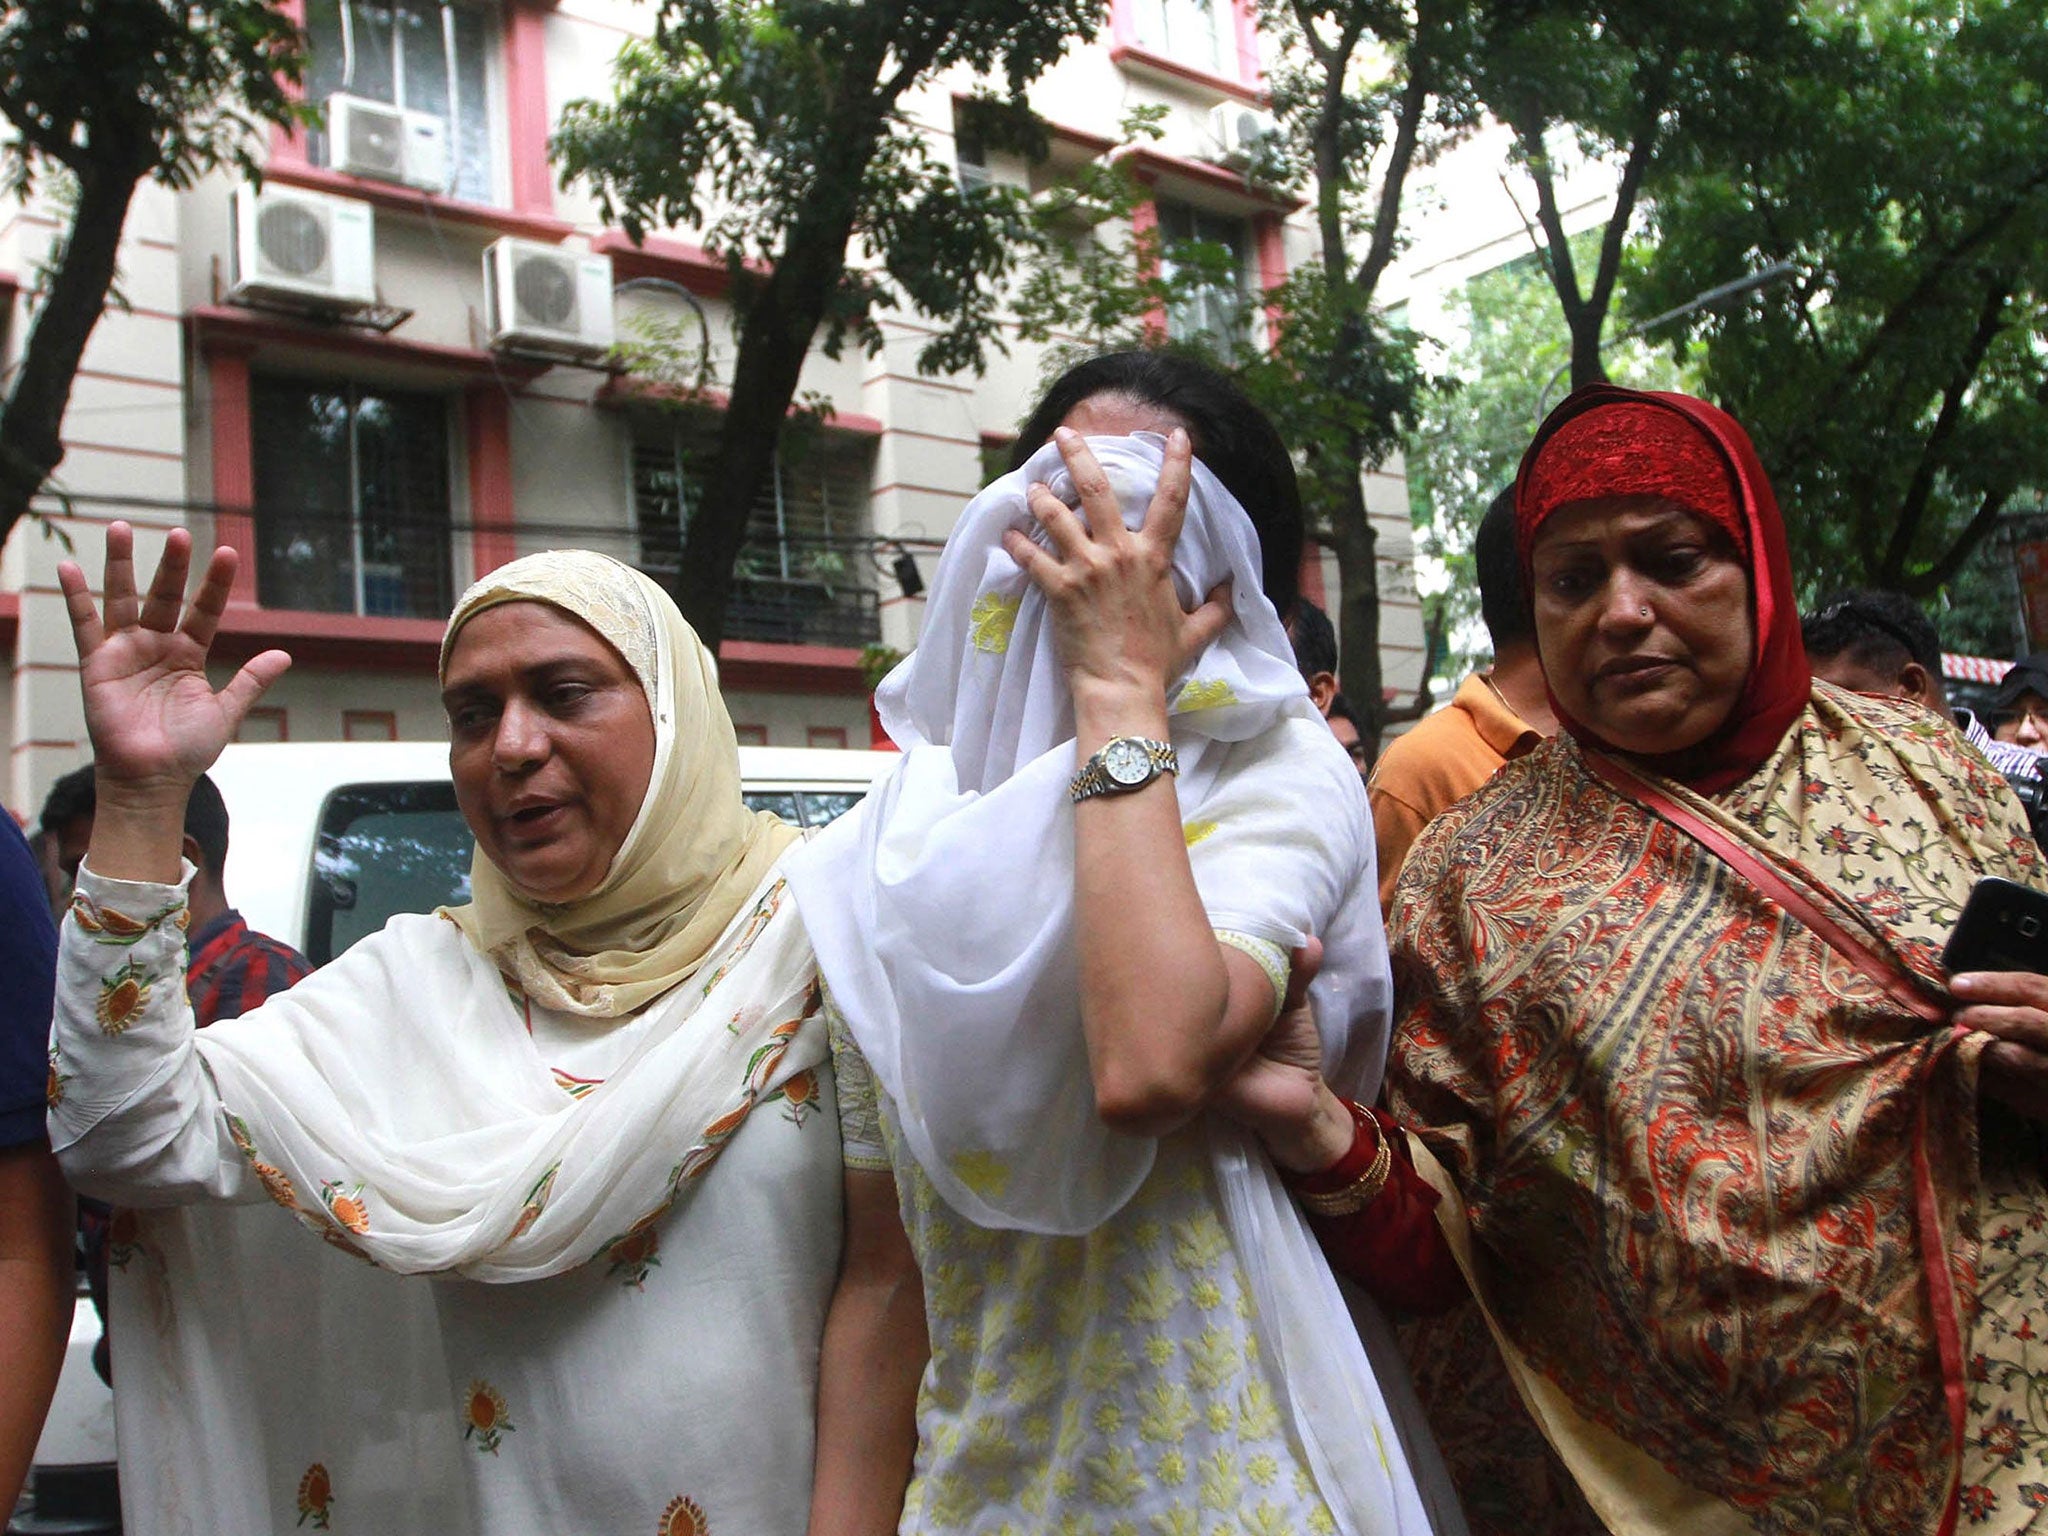 Relatives of the Dhaka terrorists attack victims mourn as they go to identify bodies from the Holey Artisan Bakery in Dhaka, Bangladesh